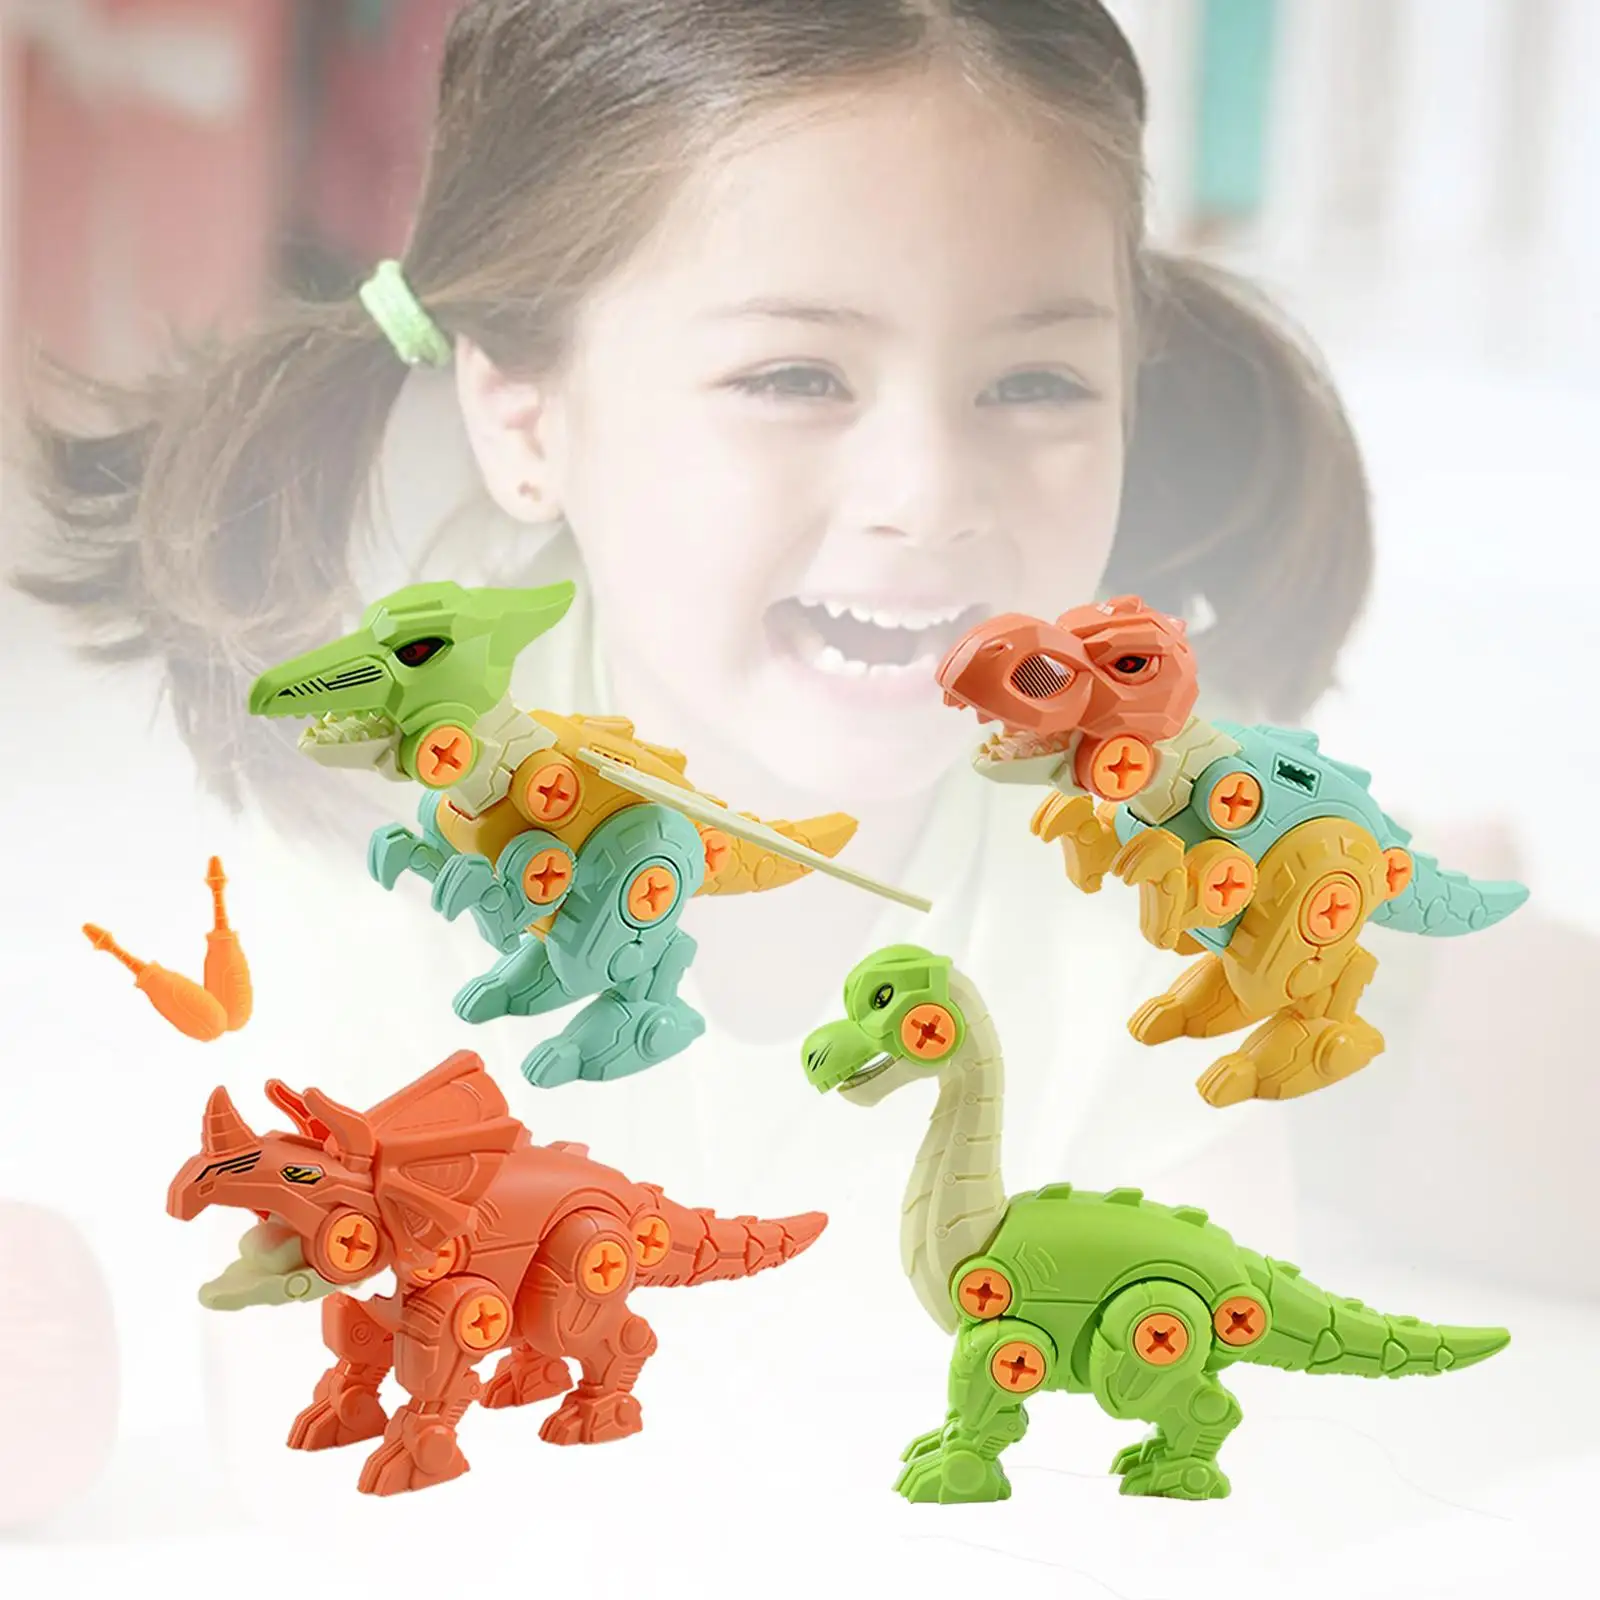 4x Take Apart Dinosaur Model Toy Set Construction Toy Learning Toy with Screwdriver for Toddlers Kids Girls Boys Children